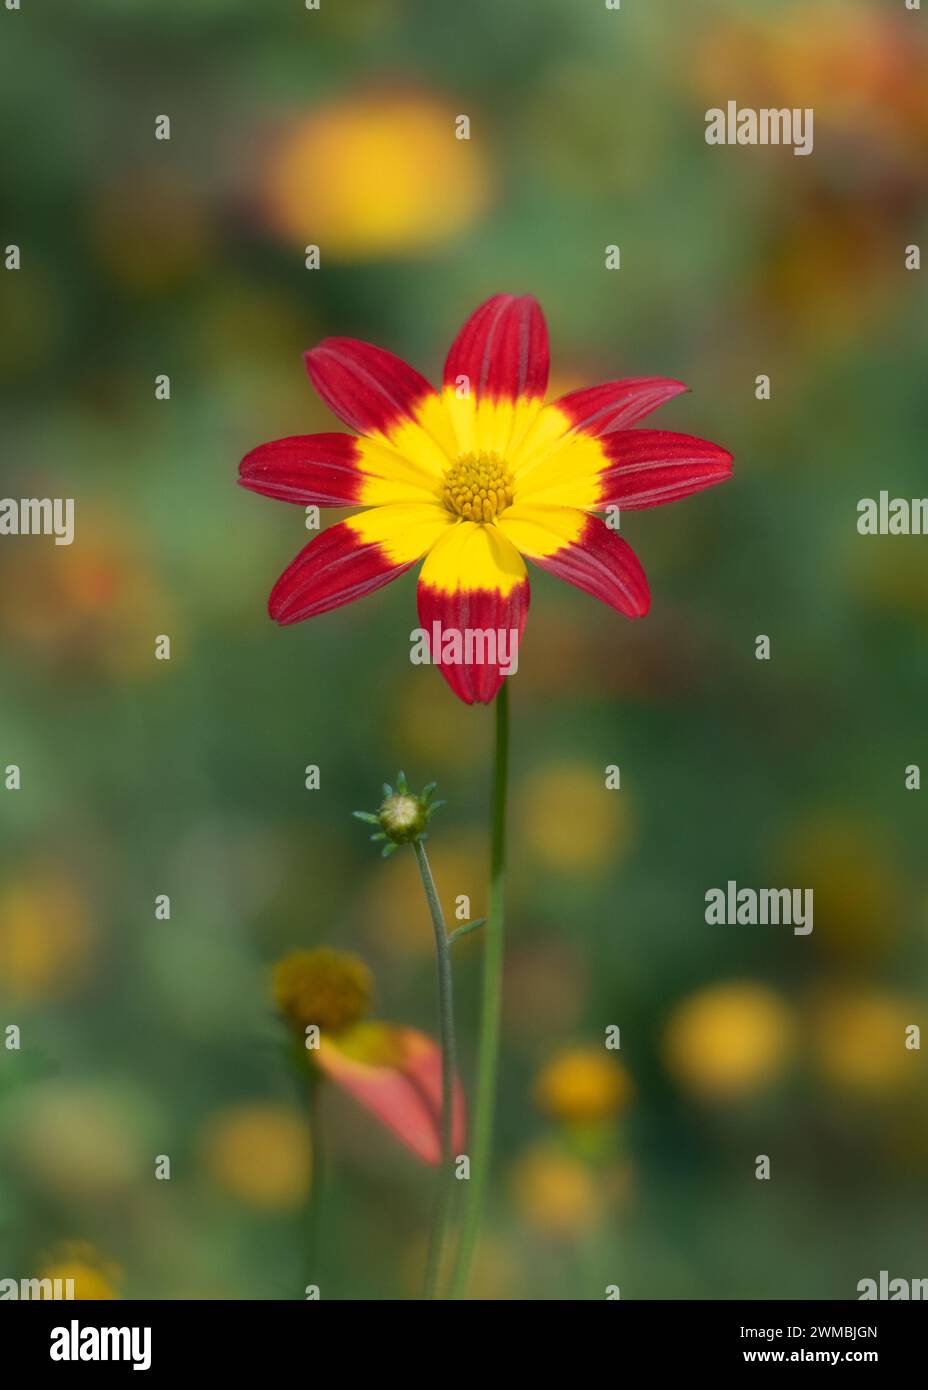 Red Bidens flower with yellow center against colorful bokeh Stock Photo